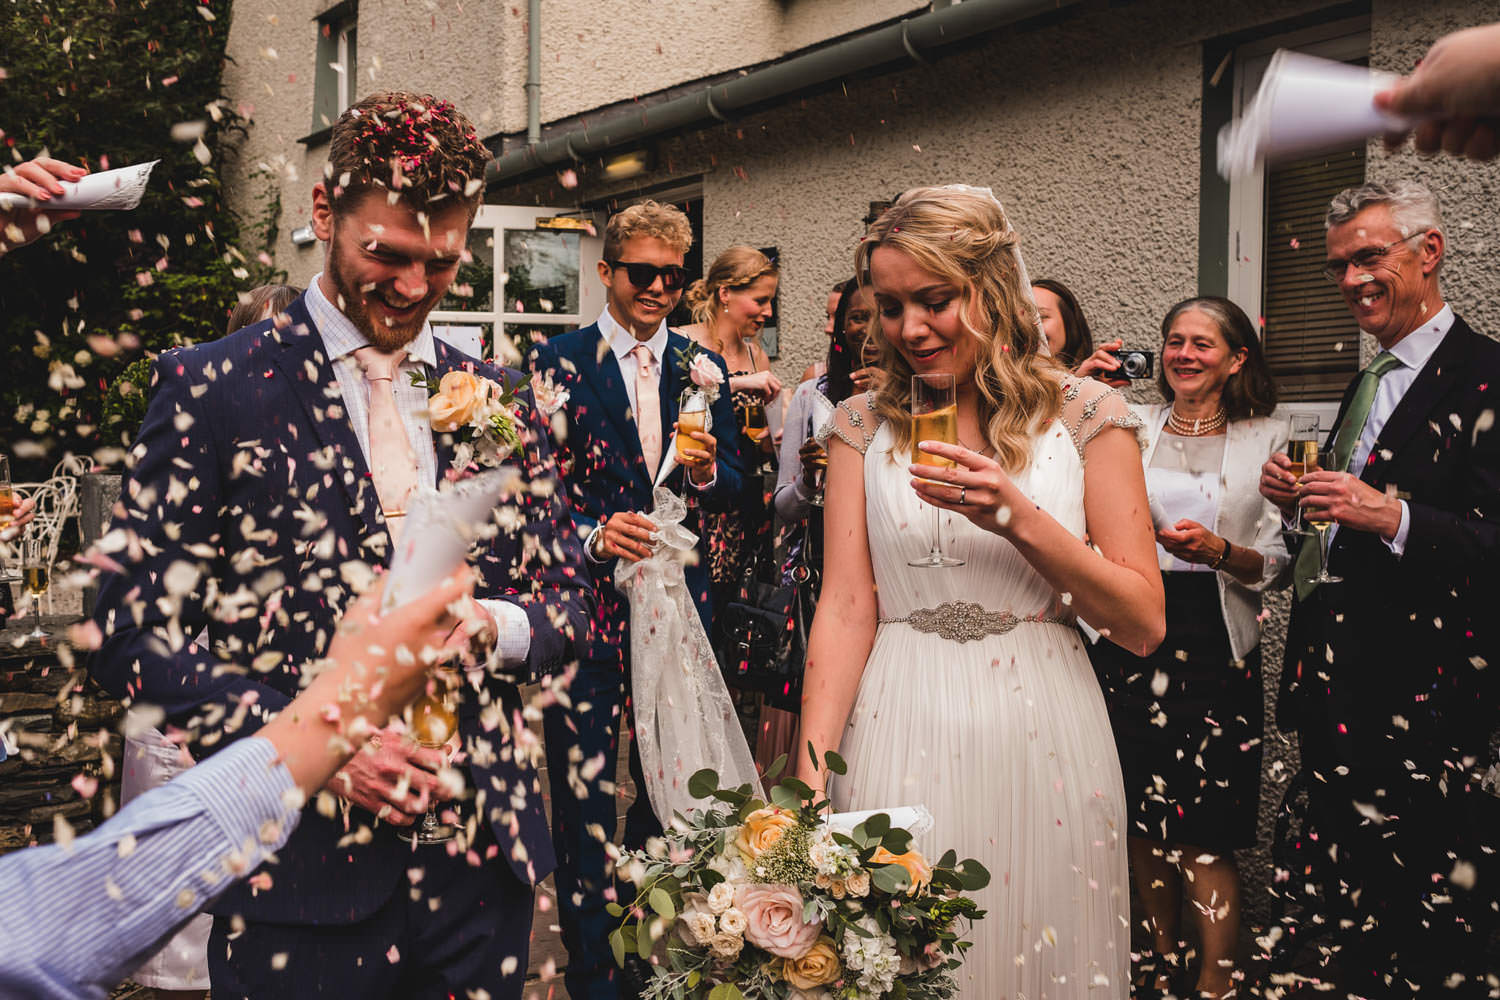 Confetti being thrown at wedding ceremony at The Punch Bowl Inn. Lake District